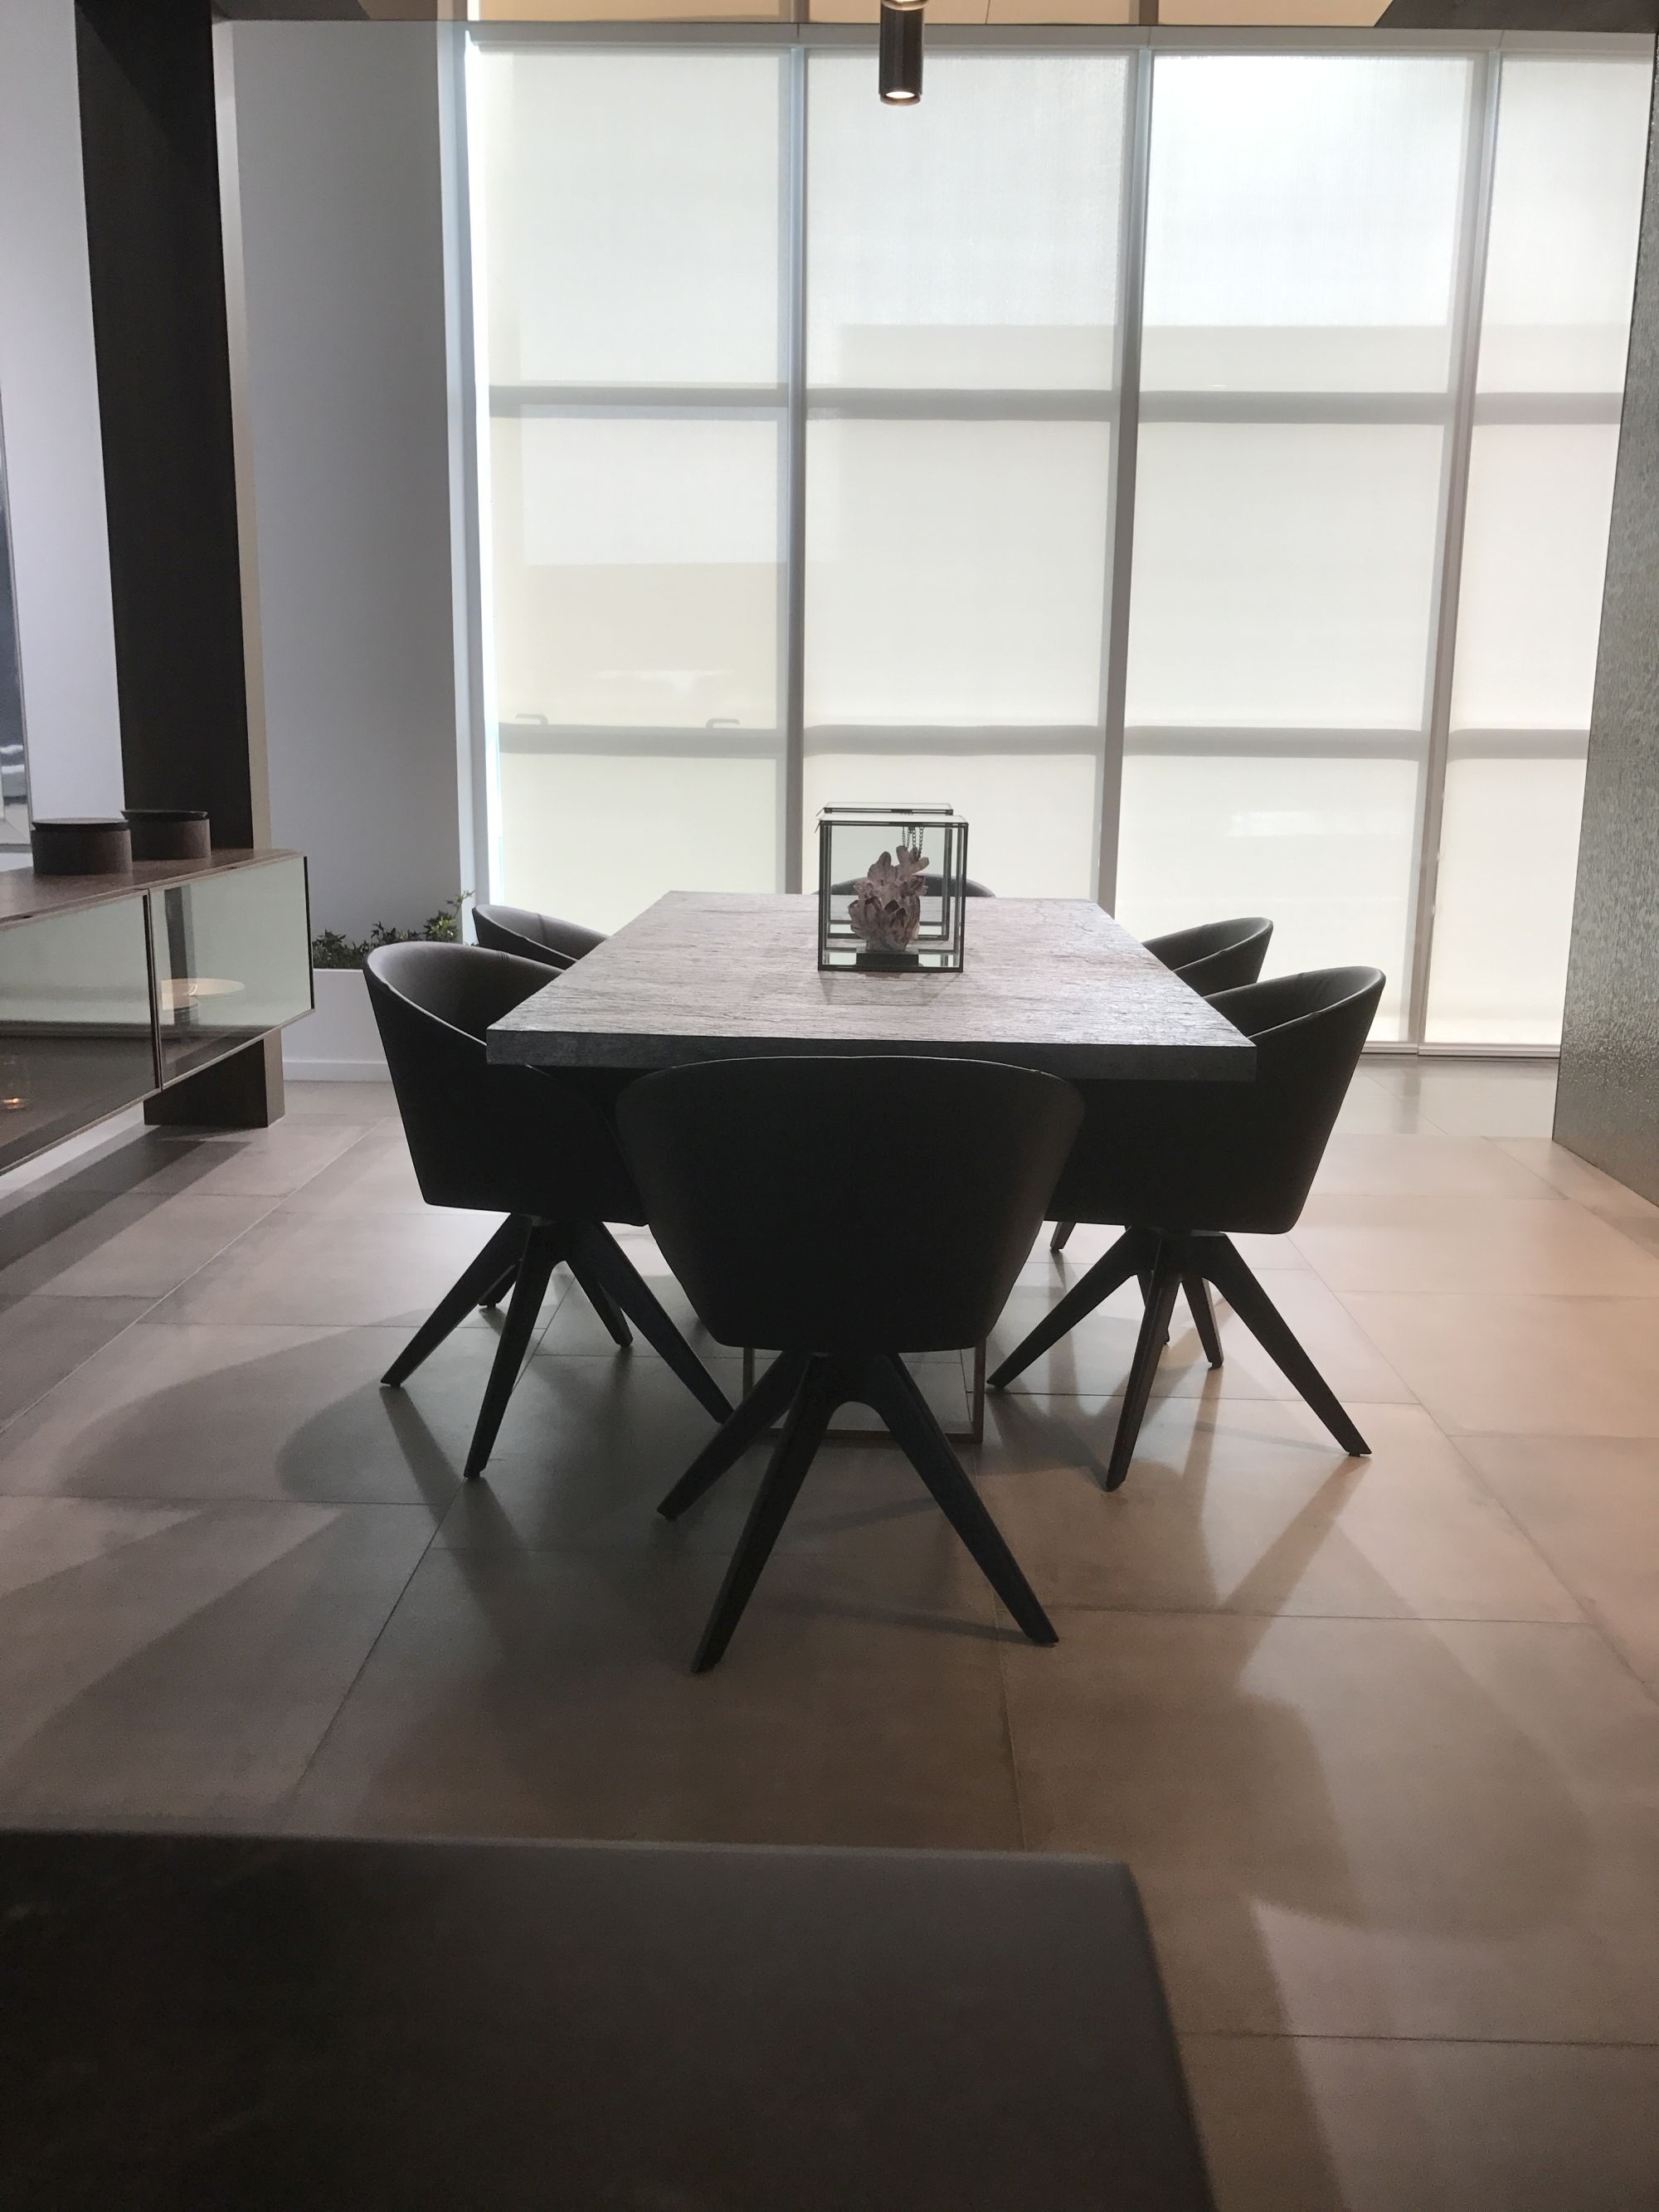 Modern dining area with marble inspired table and large floor tiles by Porcelanosa